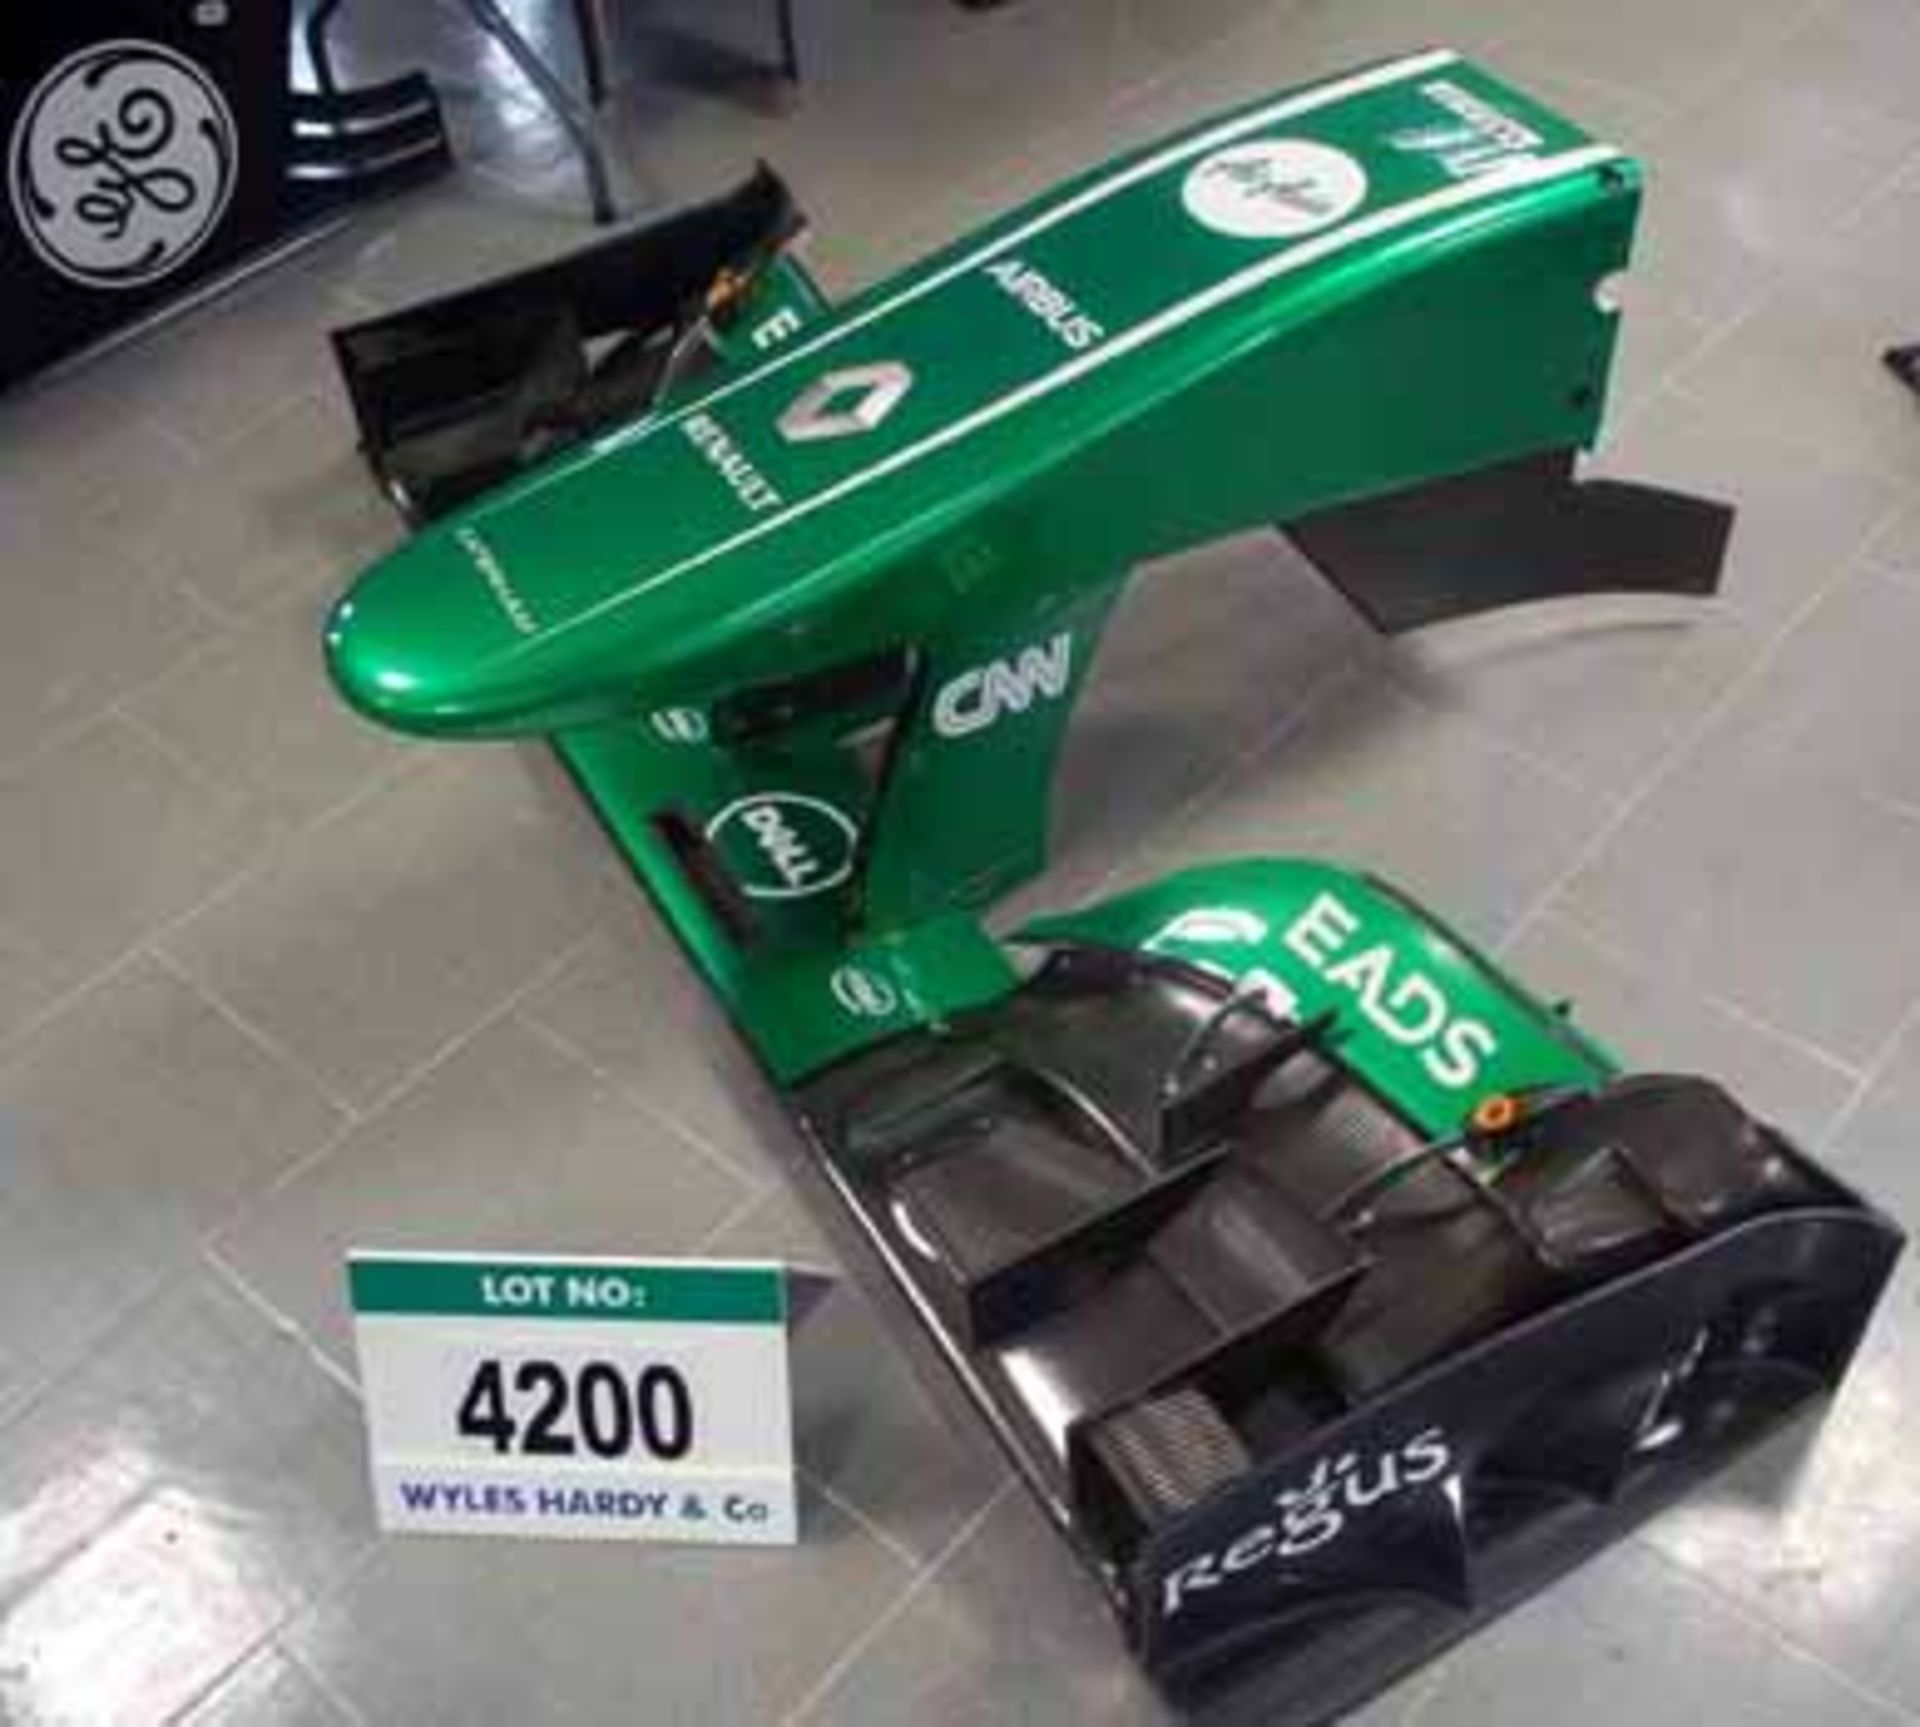 A CATERHAM F1 2011 Nose Box in 2013 CATERHAM Livery mounted on 2013 Front Wing Main Plane with AIR